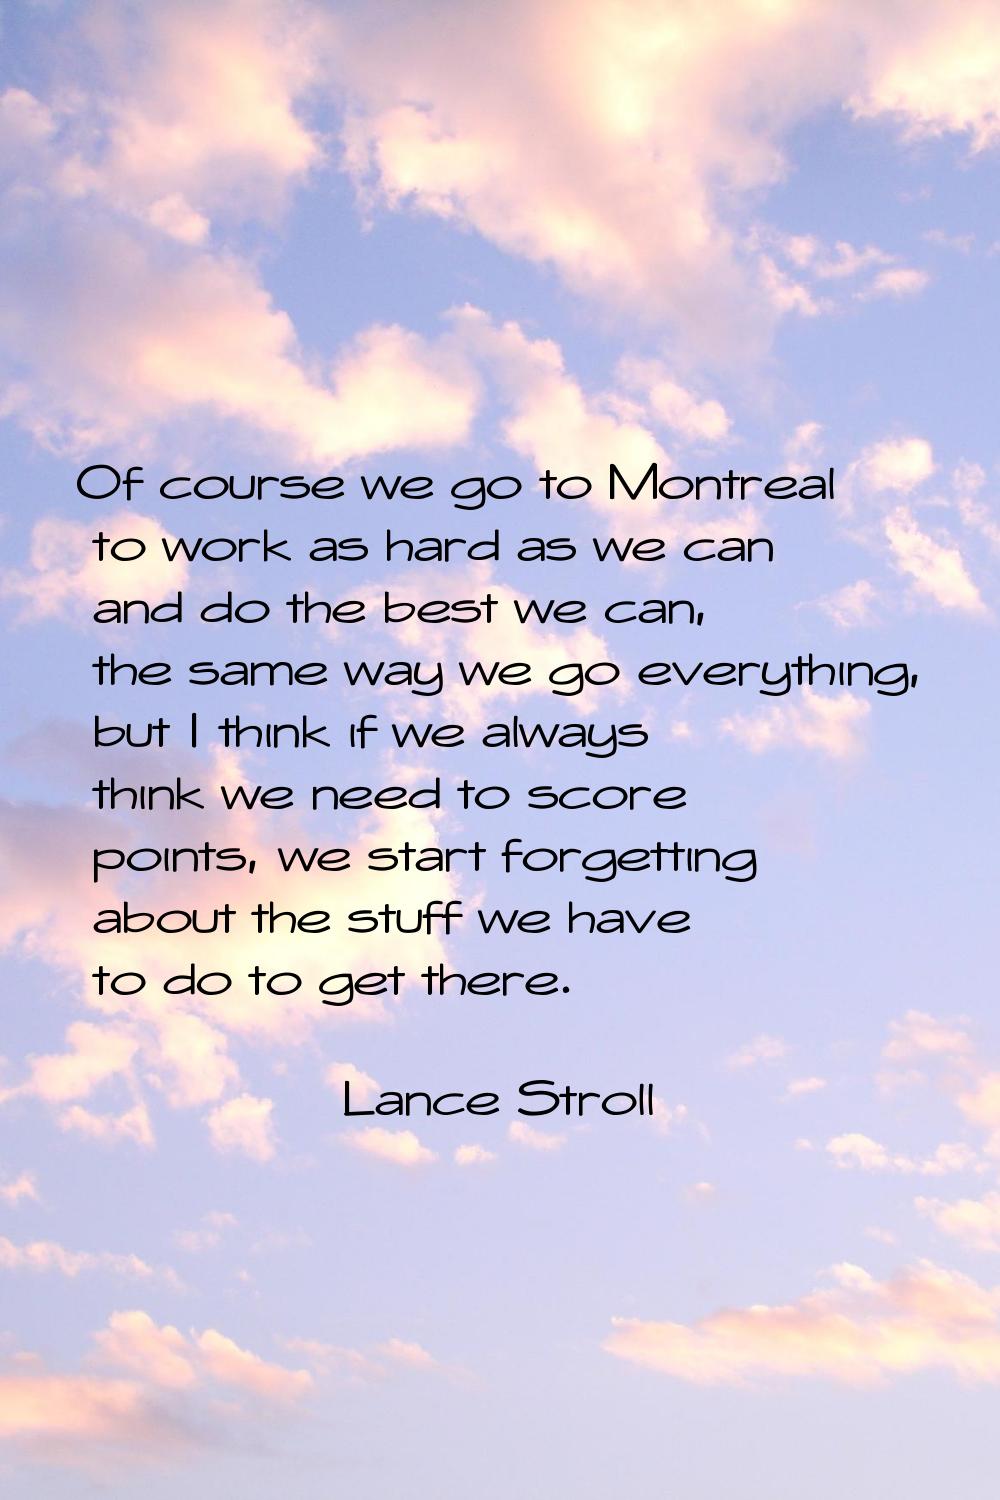 Of course we go to Montreal to work as hard as we can and do the best we can, the same way we go ev